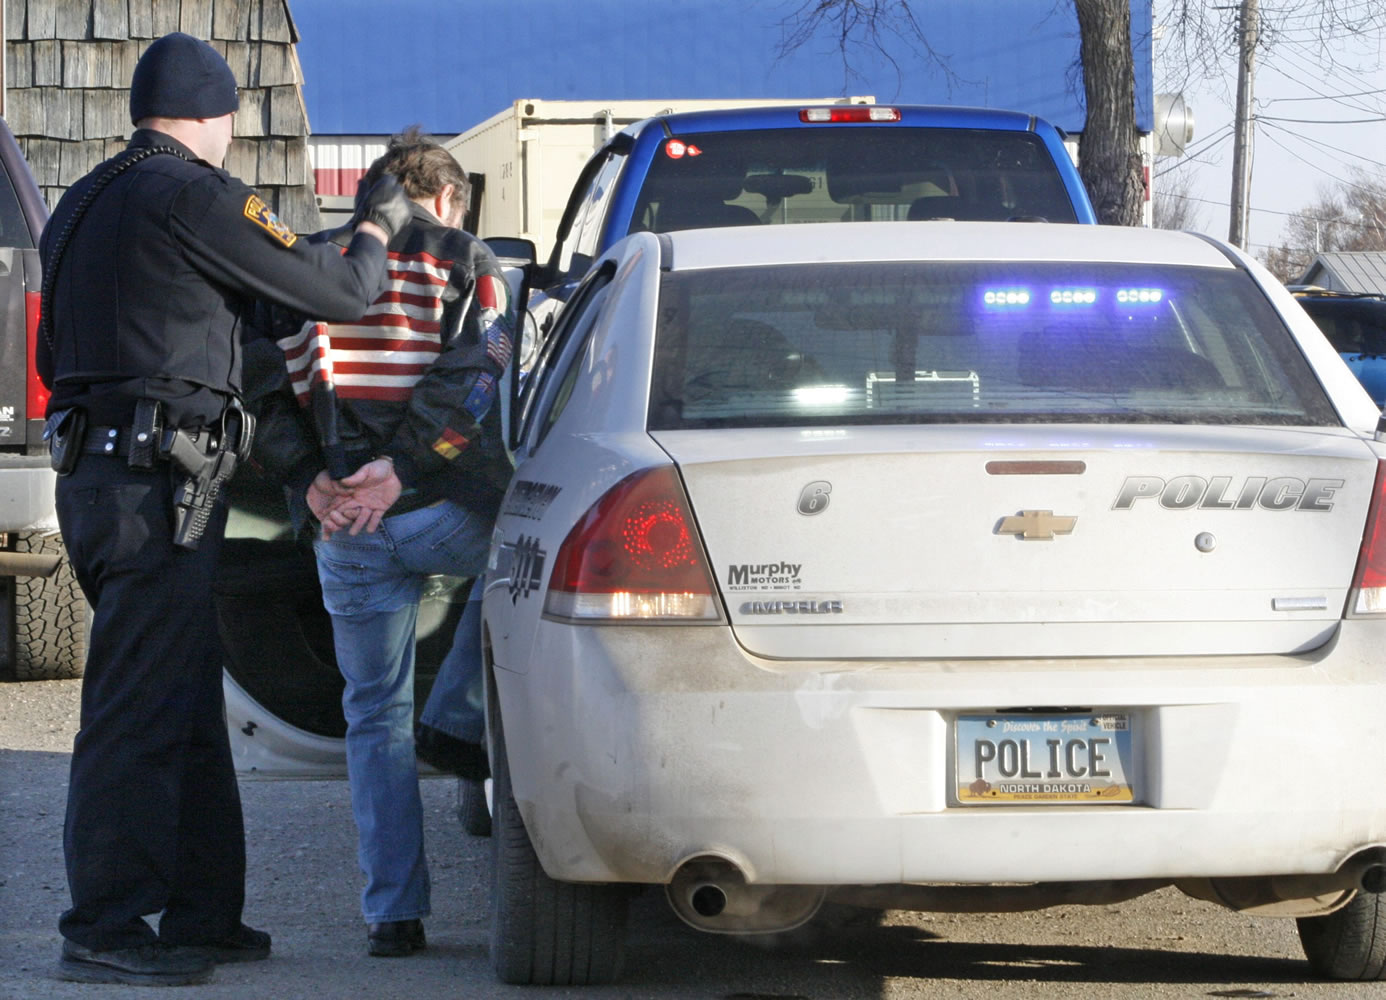 An officer guides a handcuffed man into a police car in Williston, N.D., on Feb. 28.